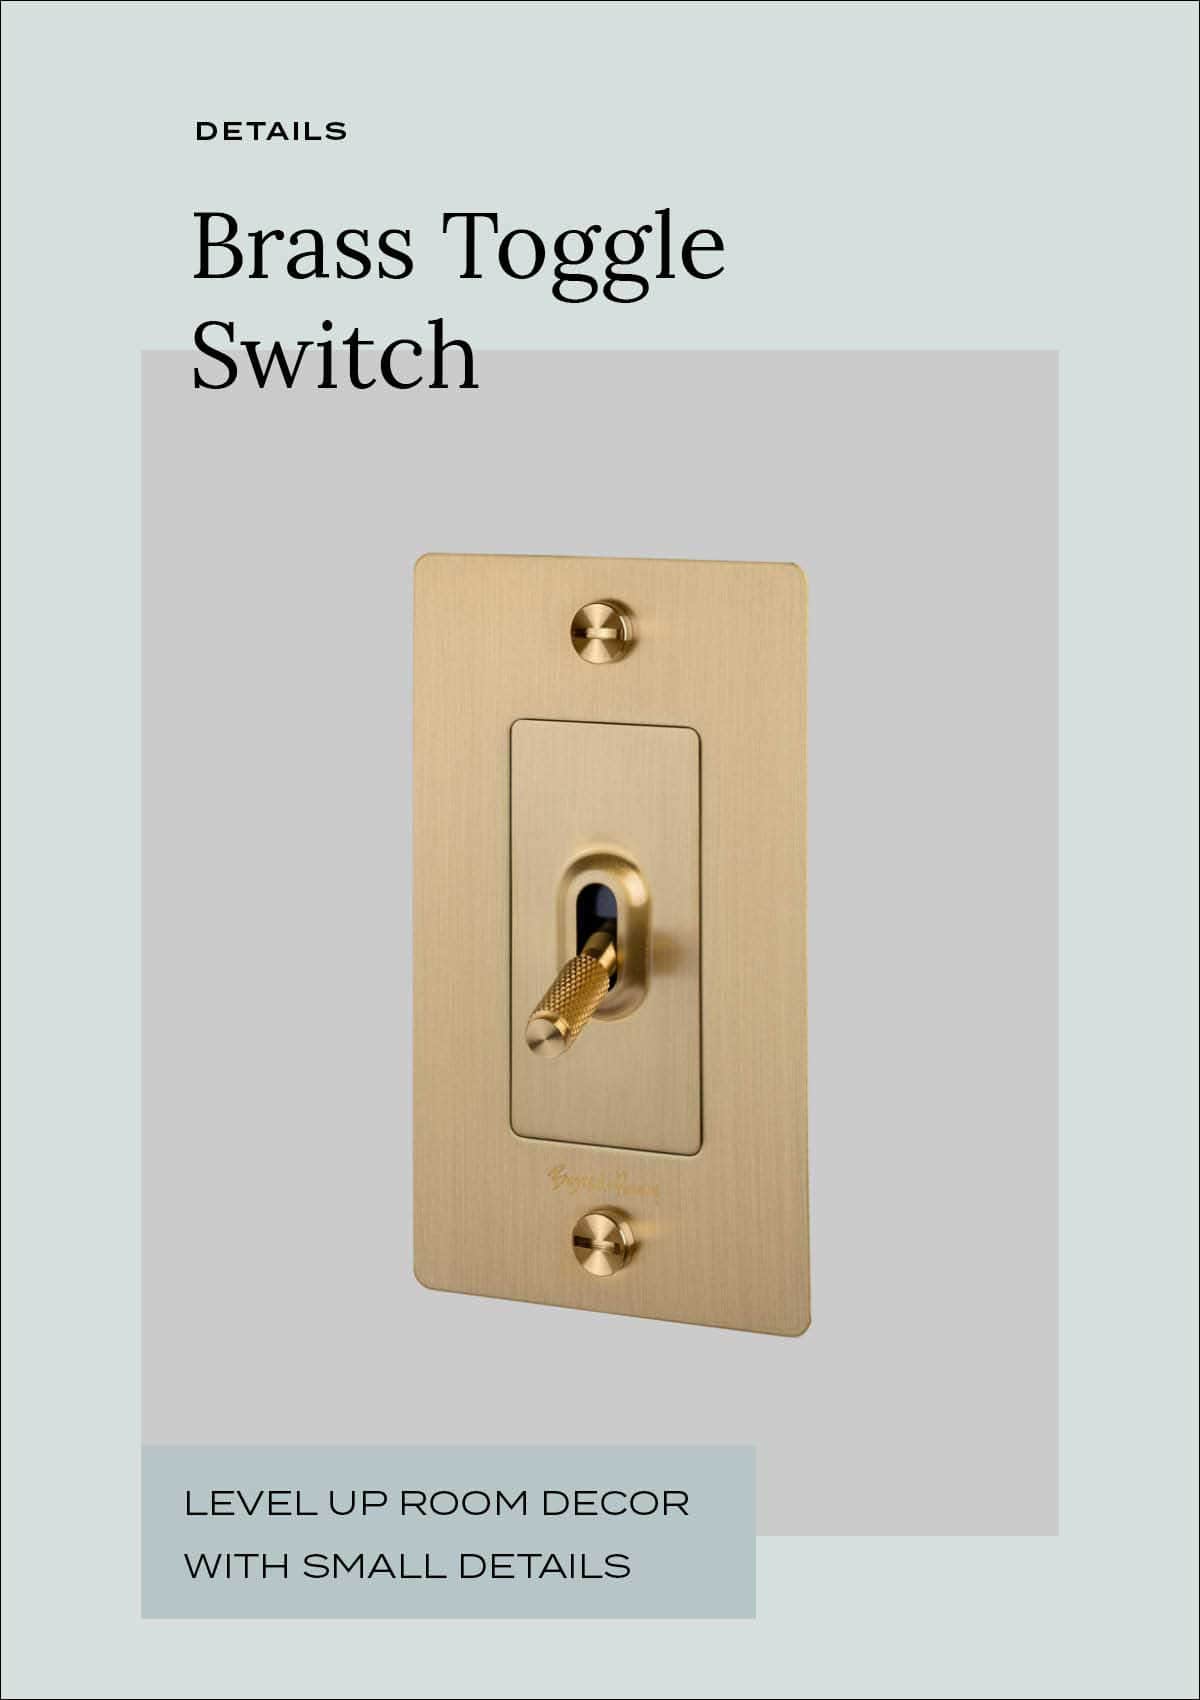 Brass toggle switch by Buster + Punch